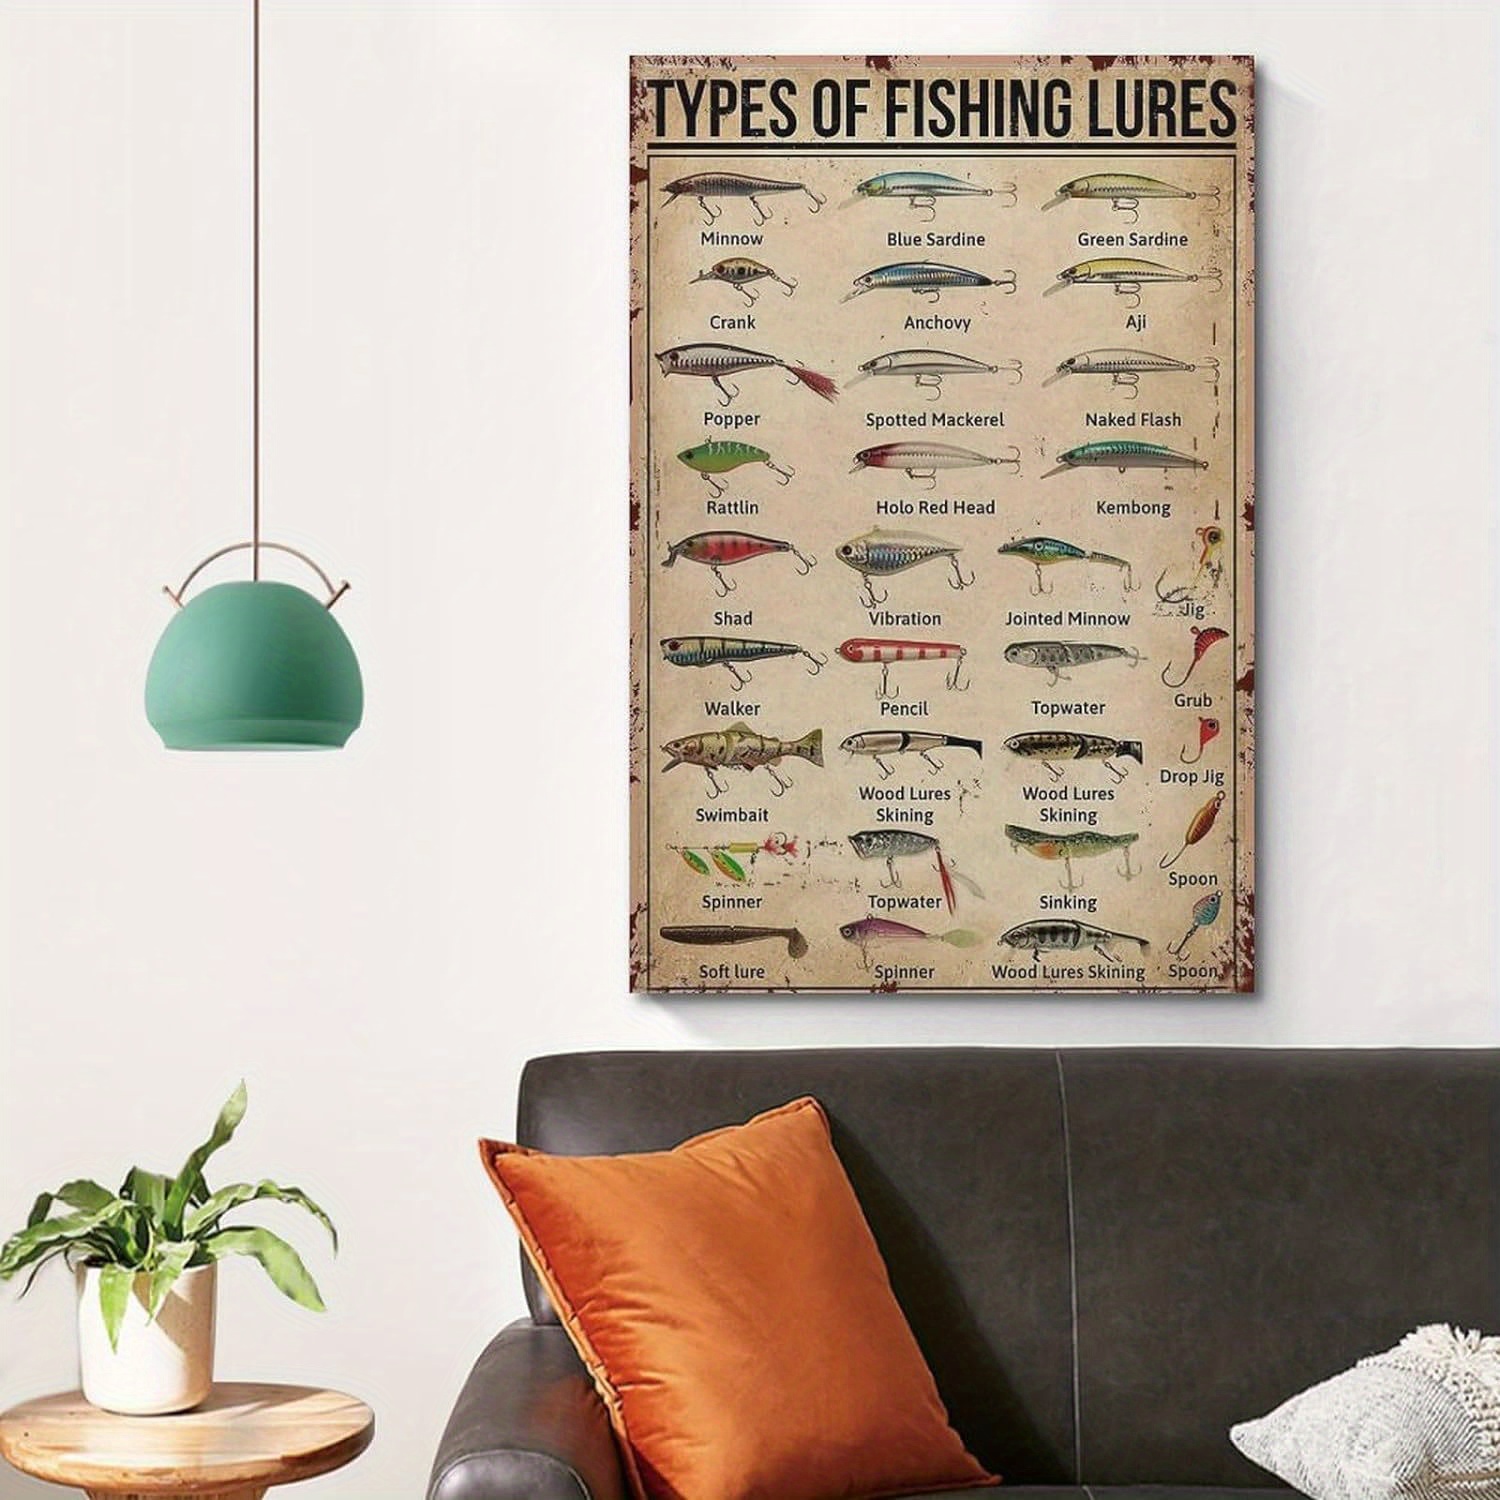 Vintage Fishing Poster, Types Of Fishing Lures Knowledge Poster